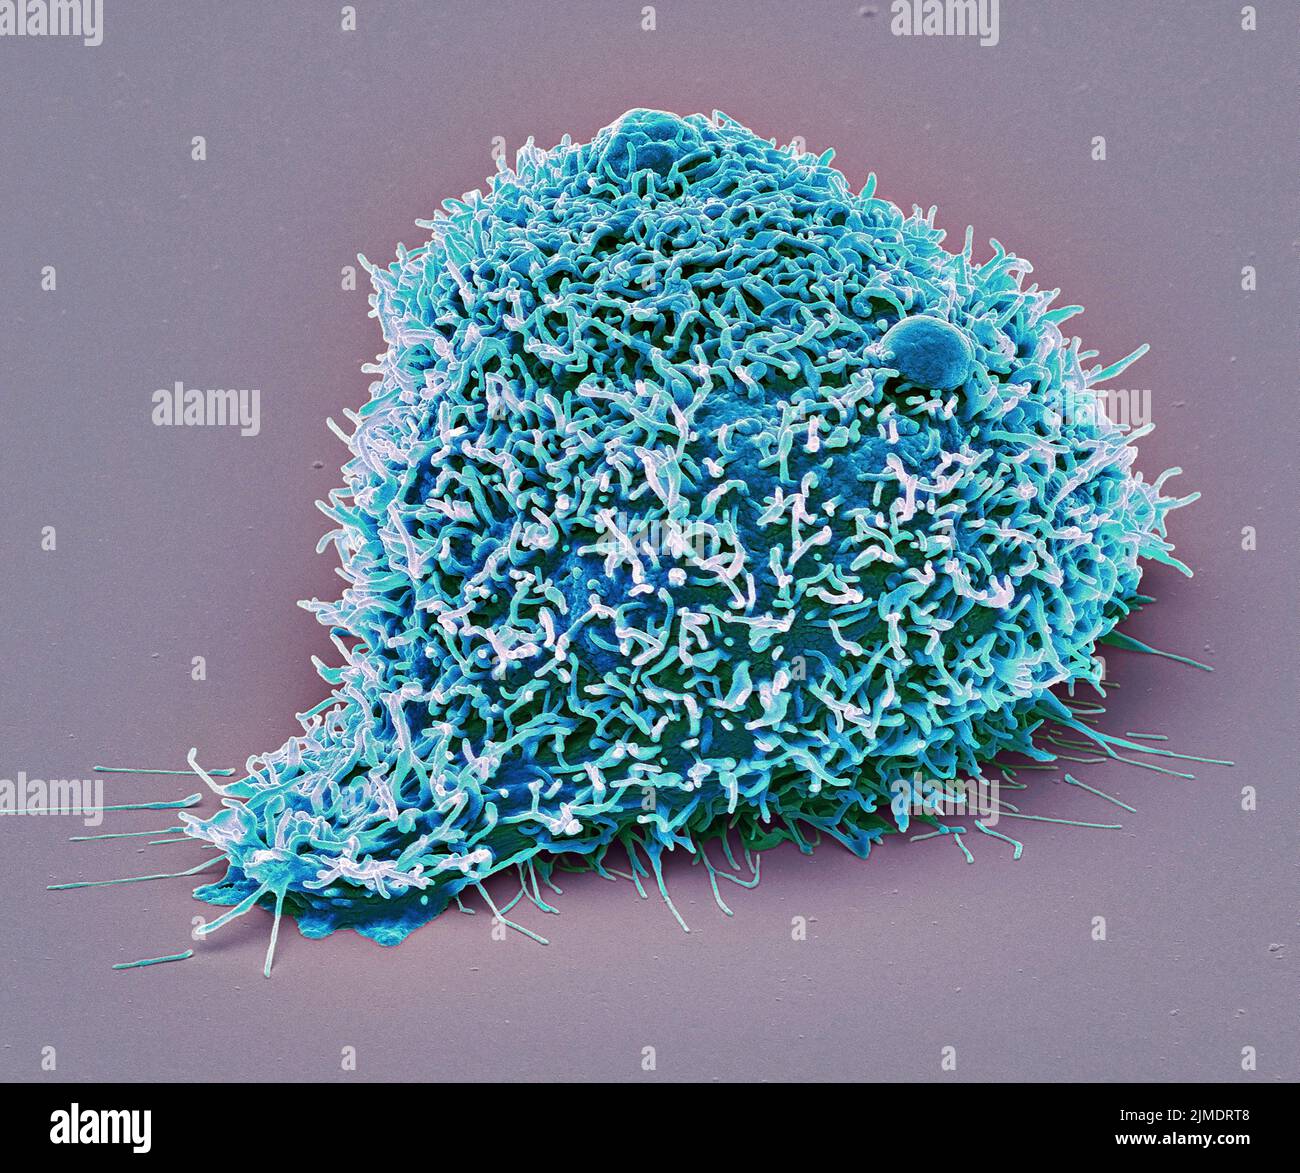 Kidney cancer cell. Coloured scanning electron micrograph (SEM) of a Kidney carcinoma cell. Cancer cells divide rapidly in a chaotic manner and may cl Stock Photo